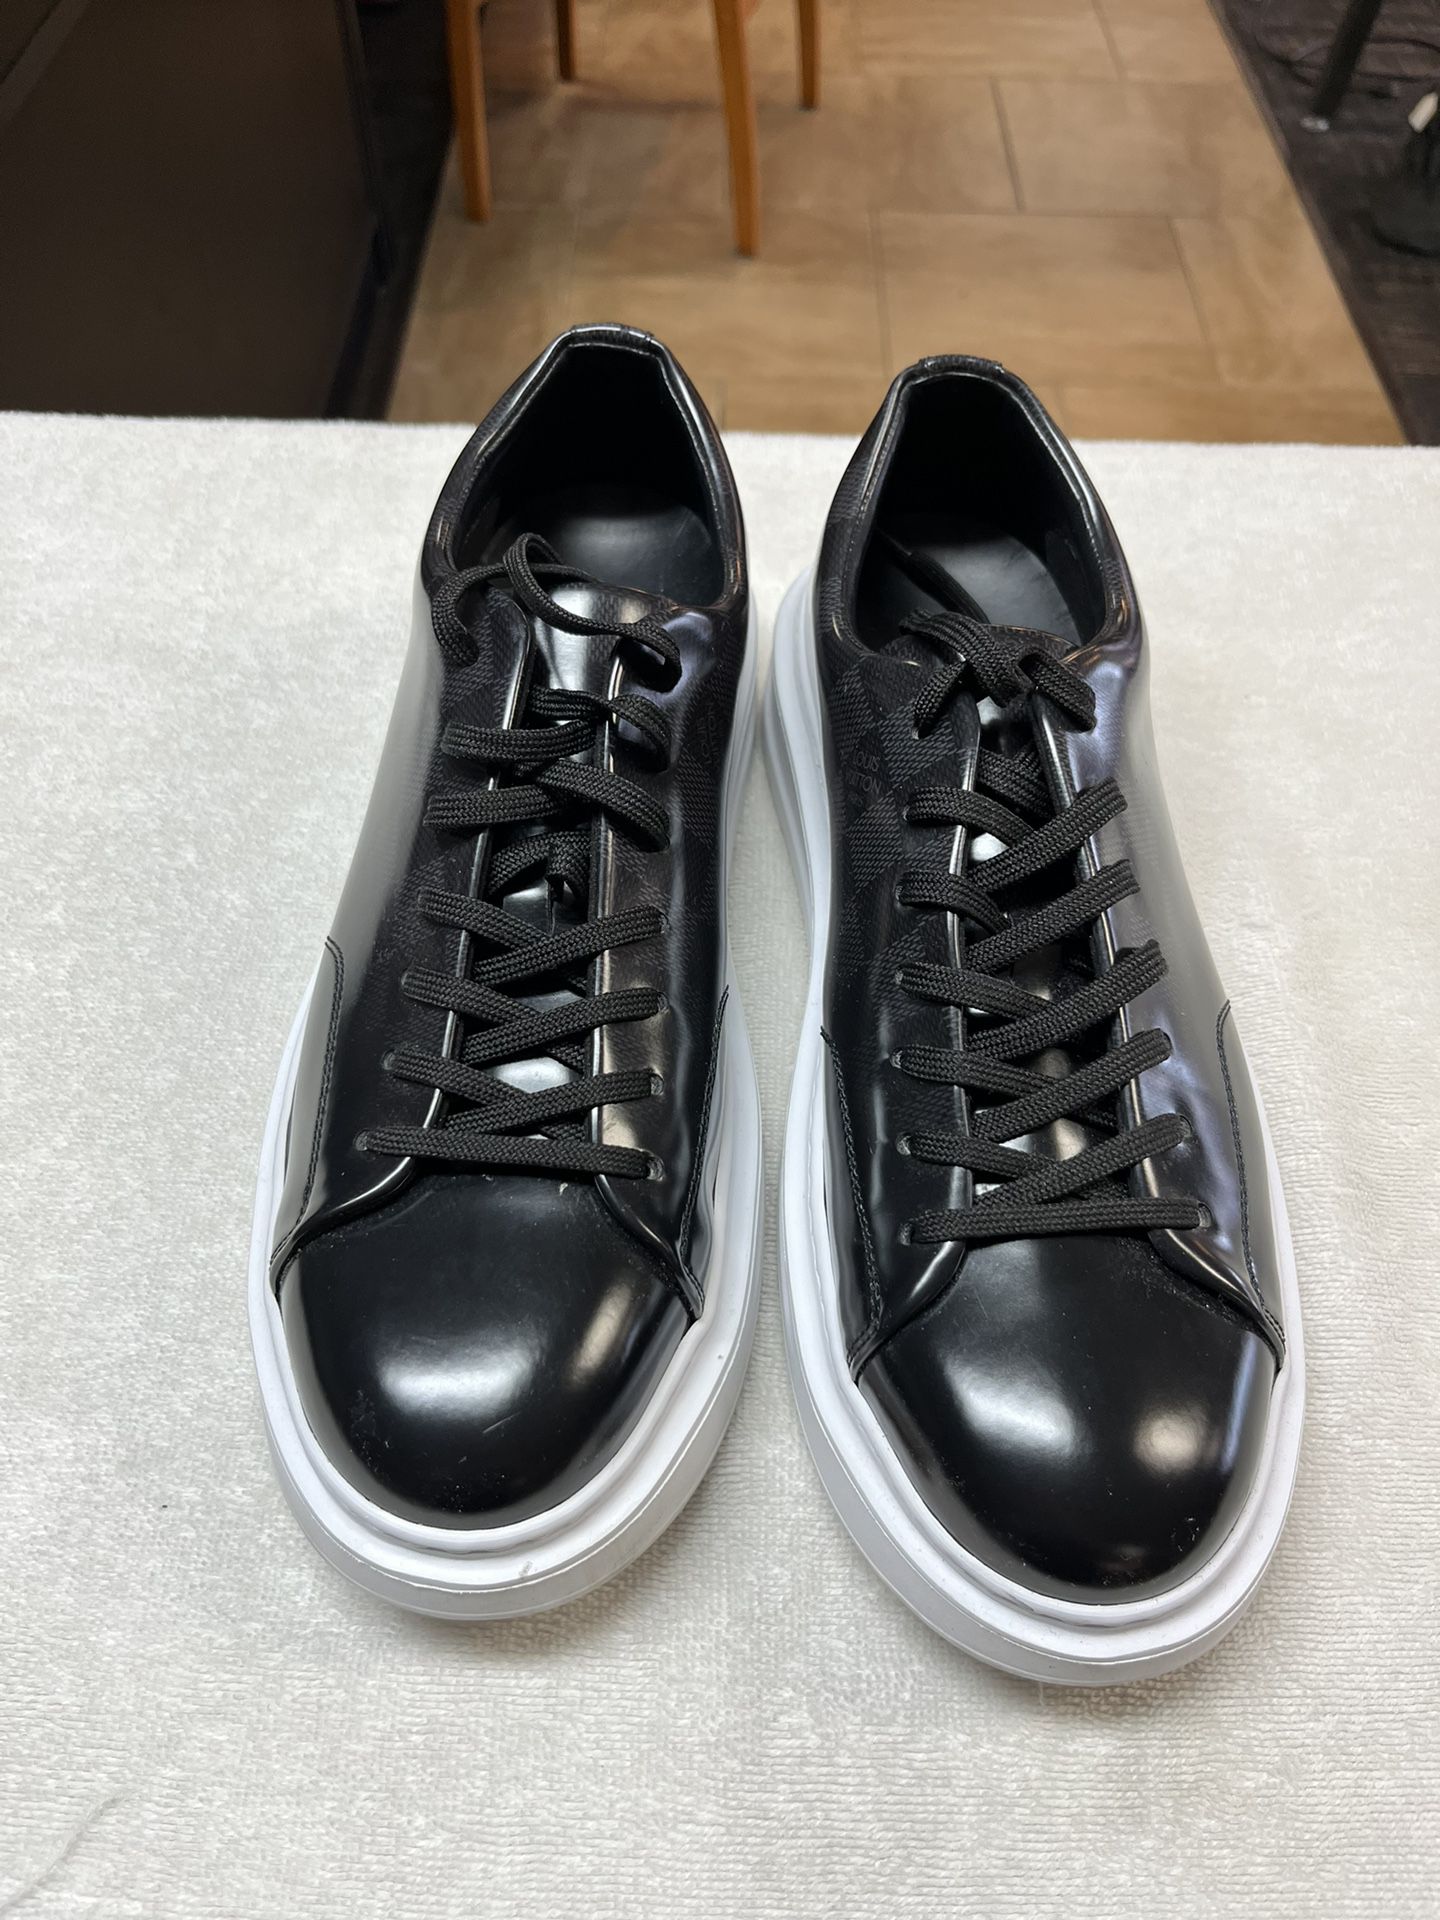 Mens Louie Vition Shoes 2020 Black Iridescent for Sale in Las Vegas, NV -  OfferUp